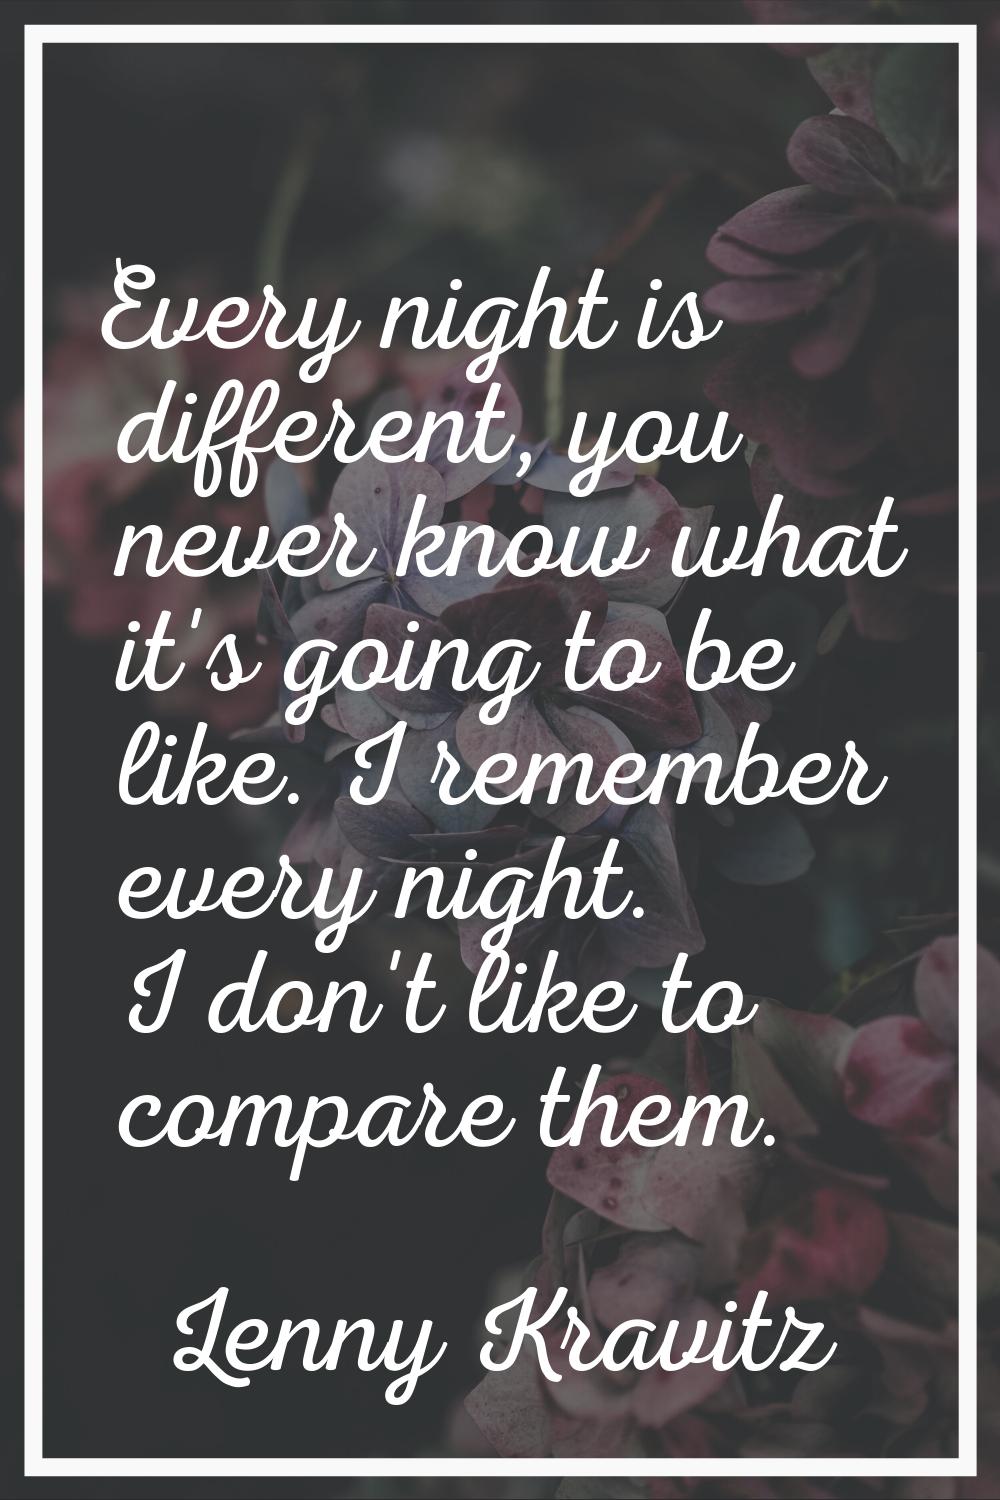 Every night is different, you never know what it's going to be like. I remember every night. I don'